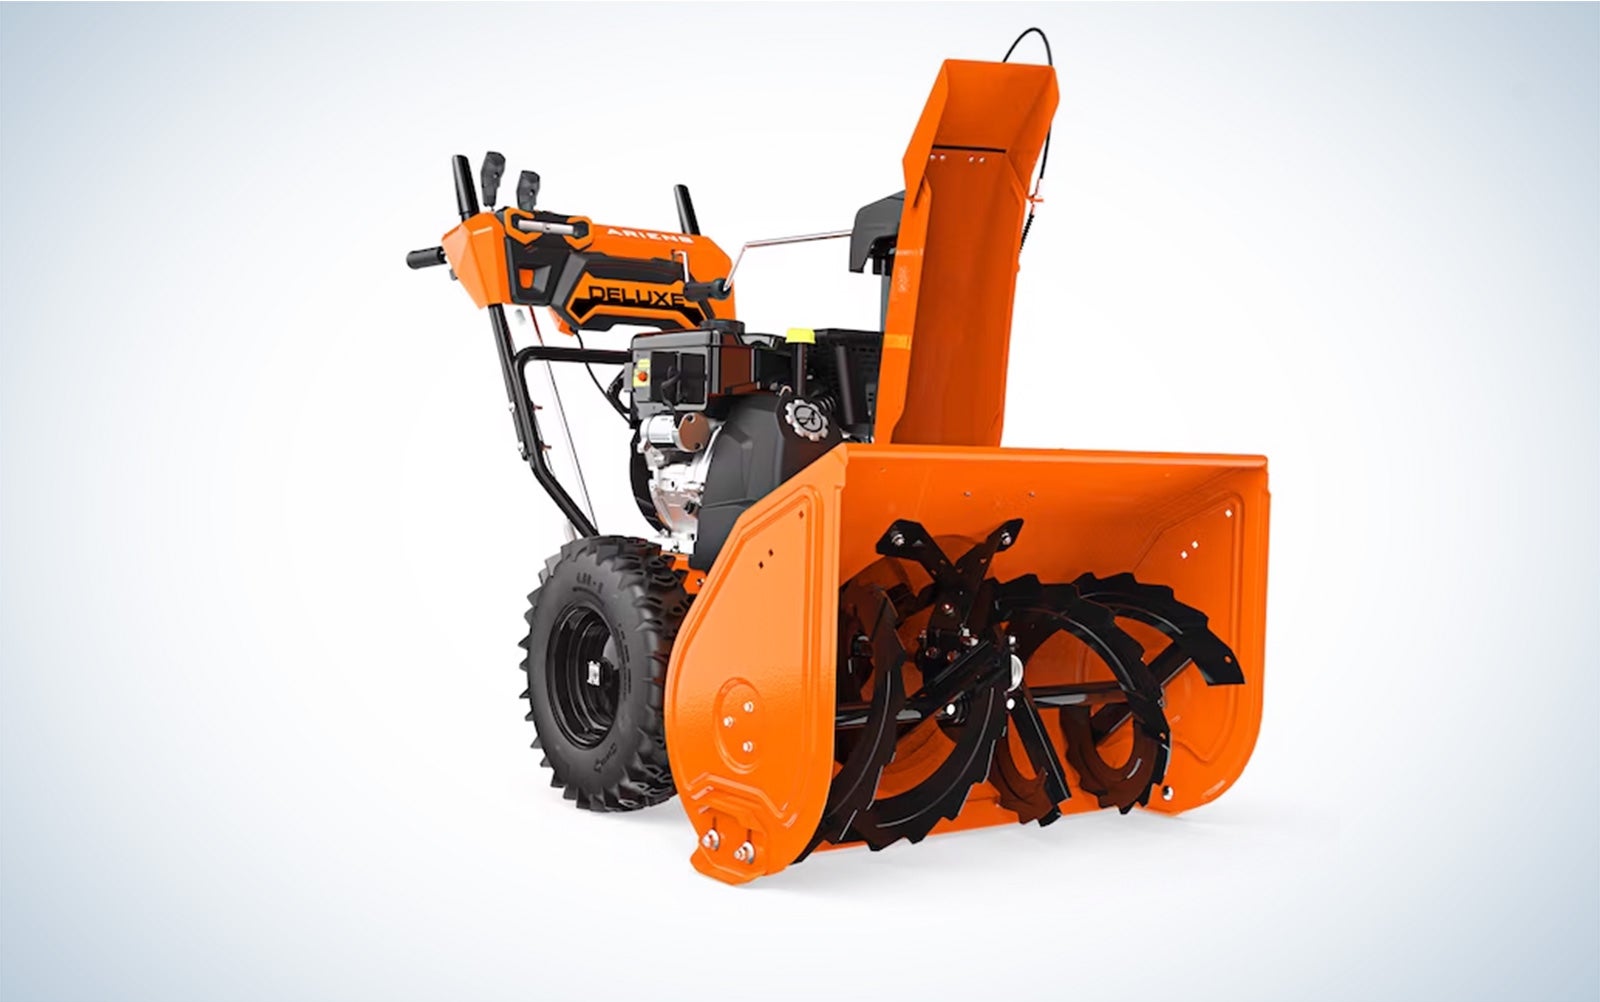 Ariens 30-inch snow blower for long driveways